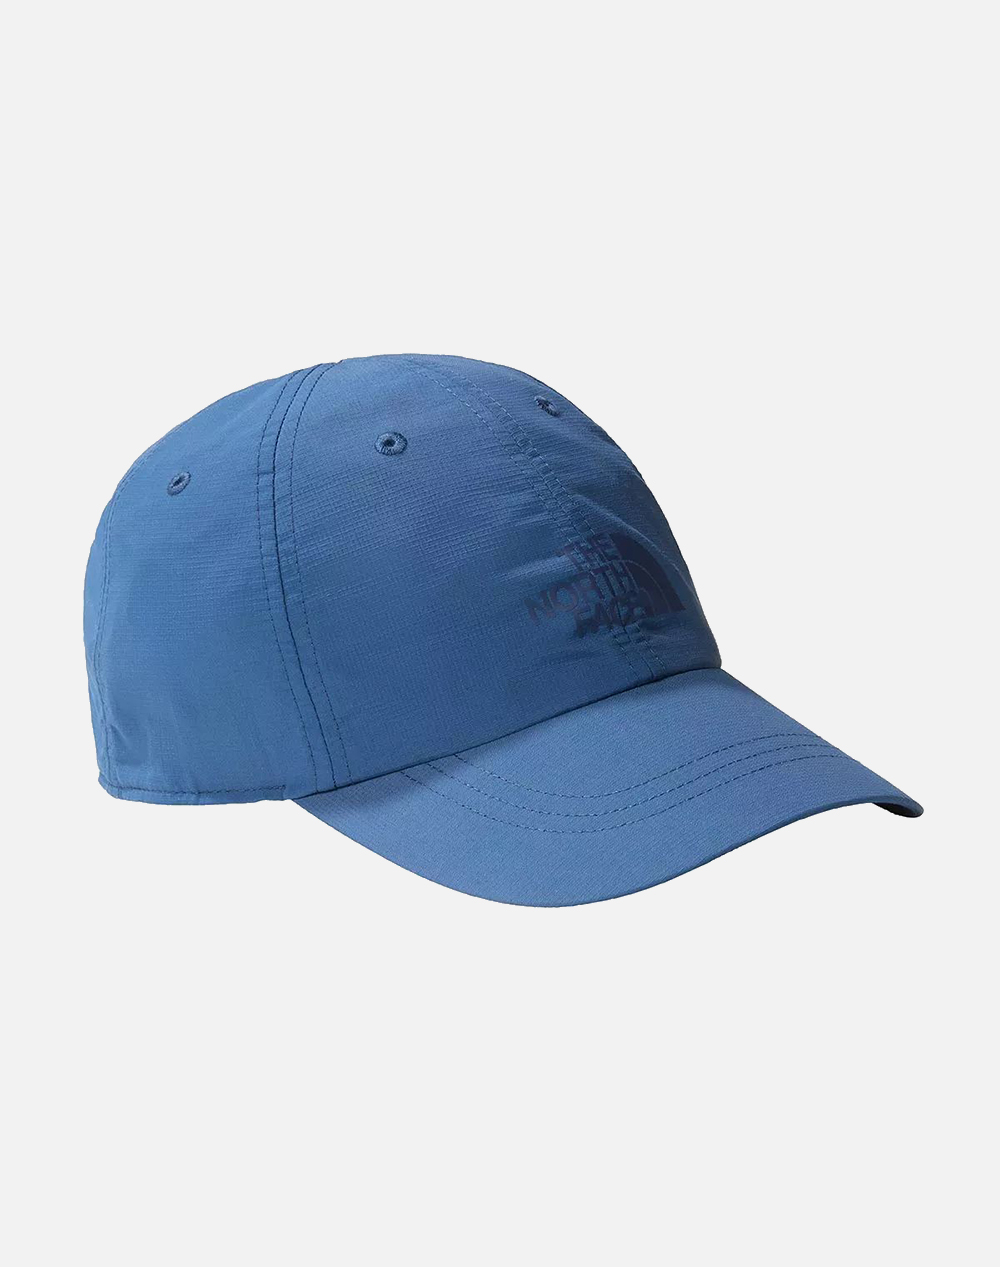 THE NORTH FACE HORIZON HAT (Διαστάσεις: 22 x 21 εκ) NF0A5FXL-NFHDC Blue